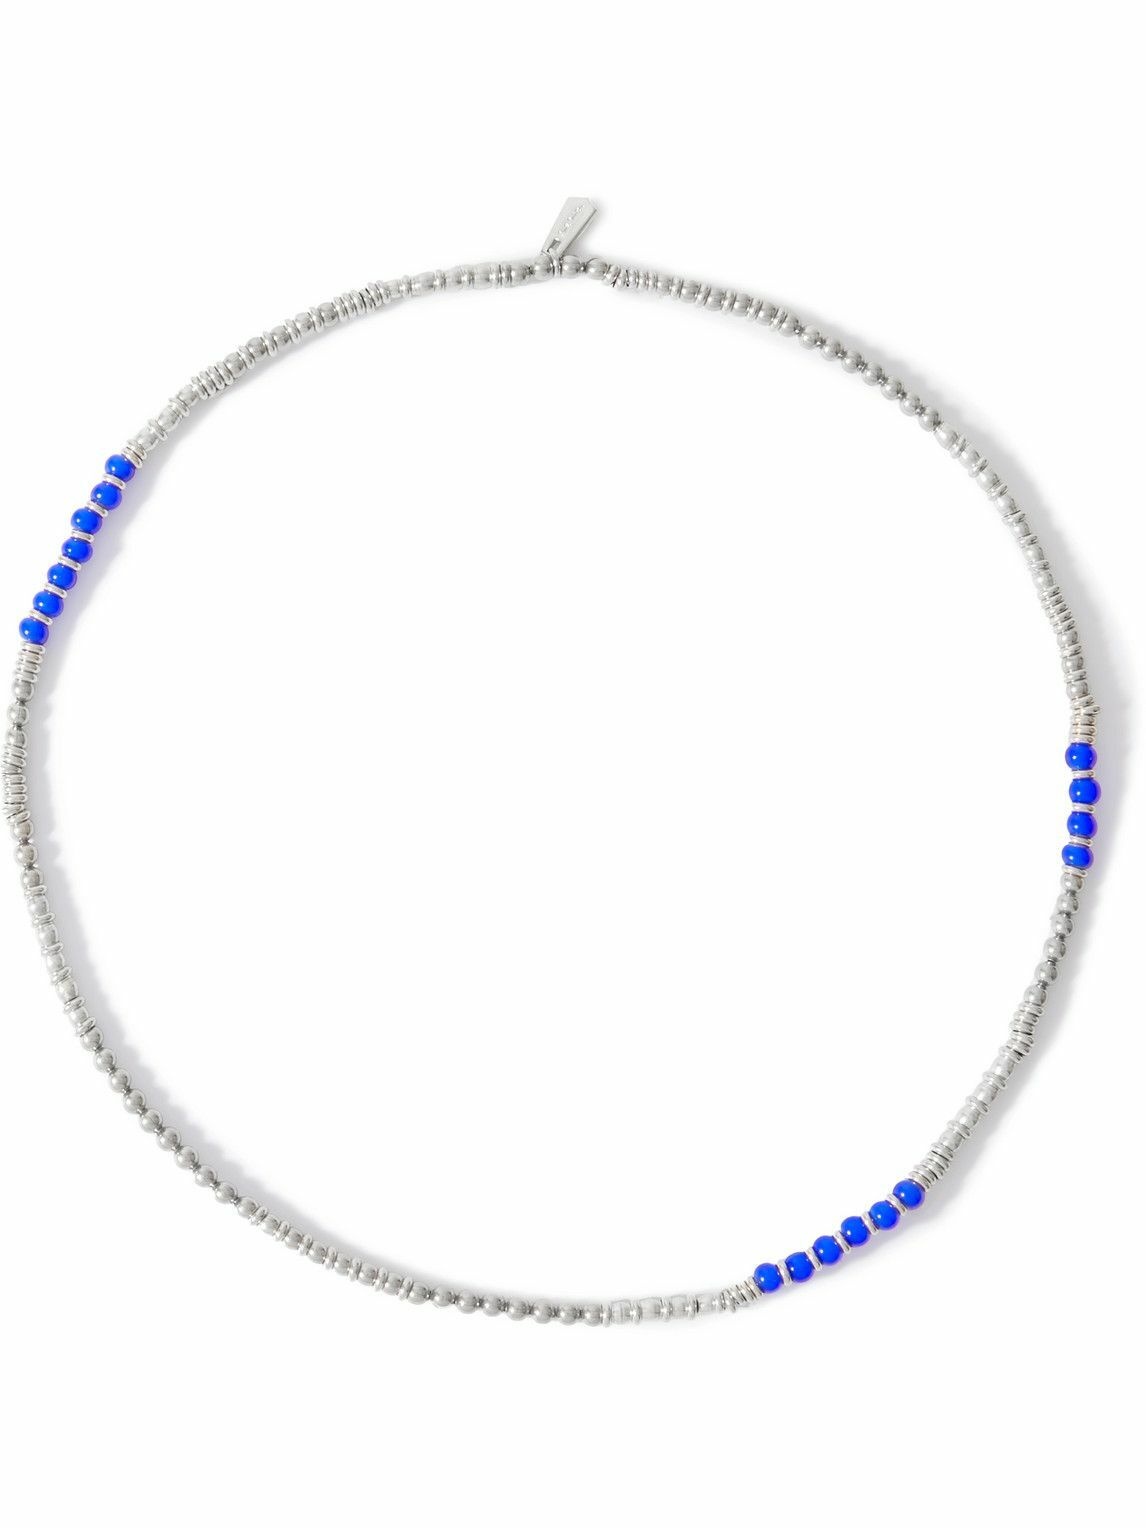 Paul Smith - Silver-Tone and Enamel Beaded Necklace Paul Smith